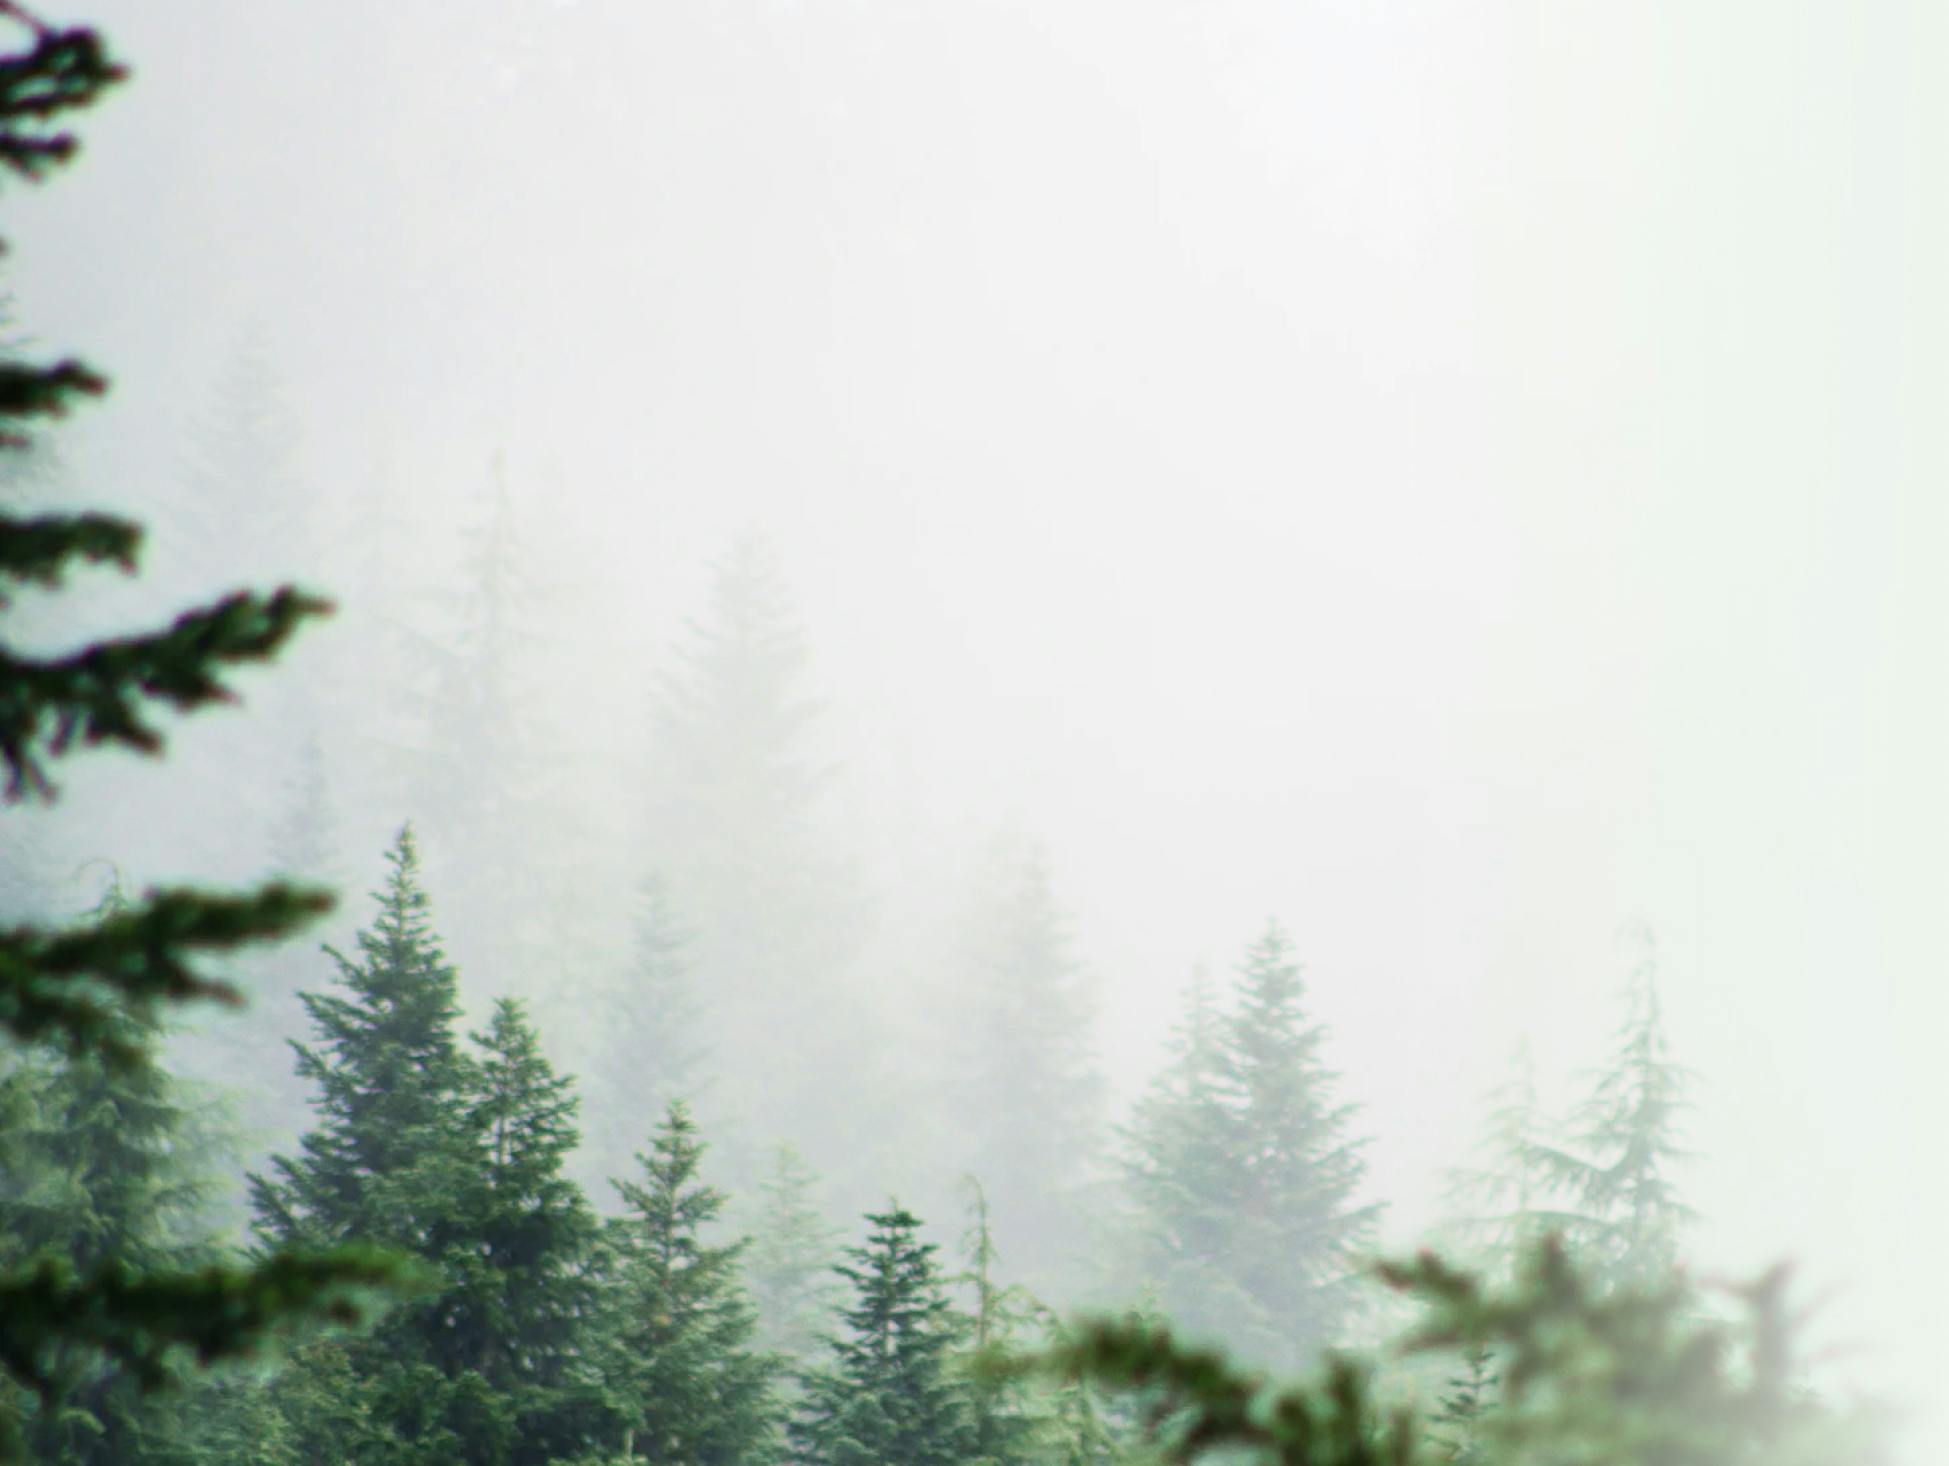 Image of a foggy forest.